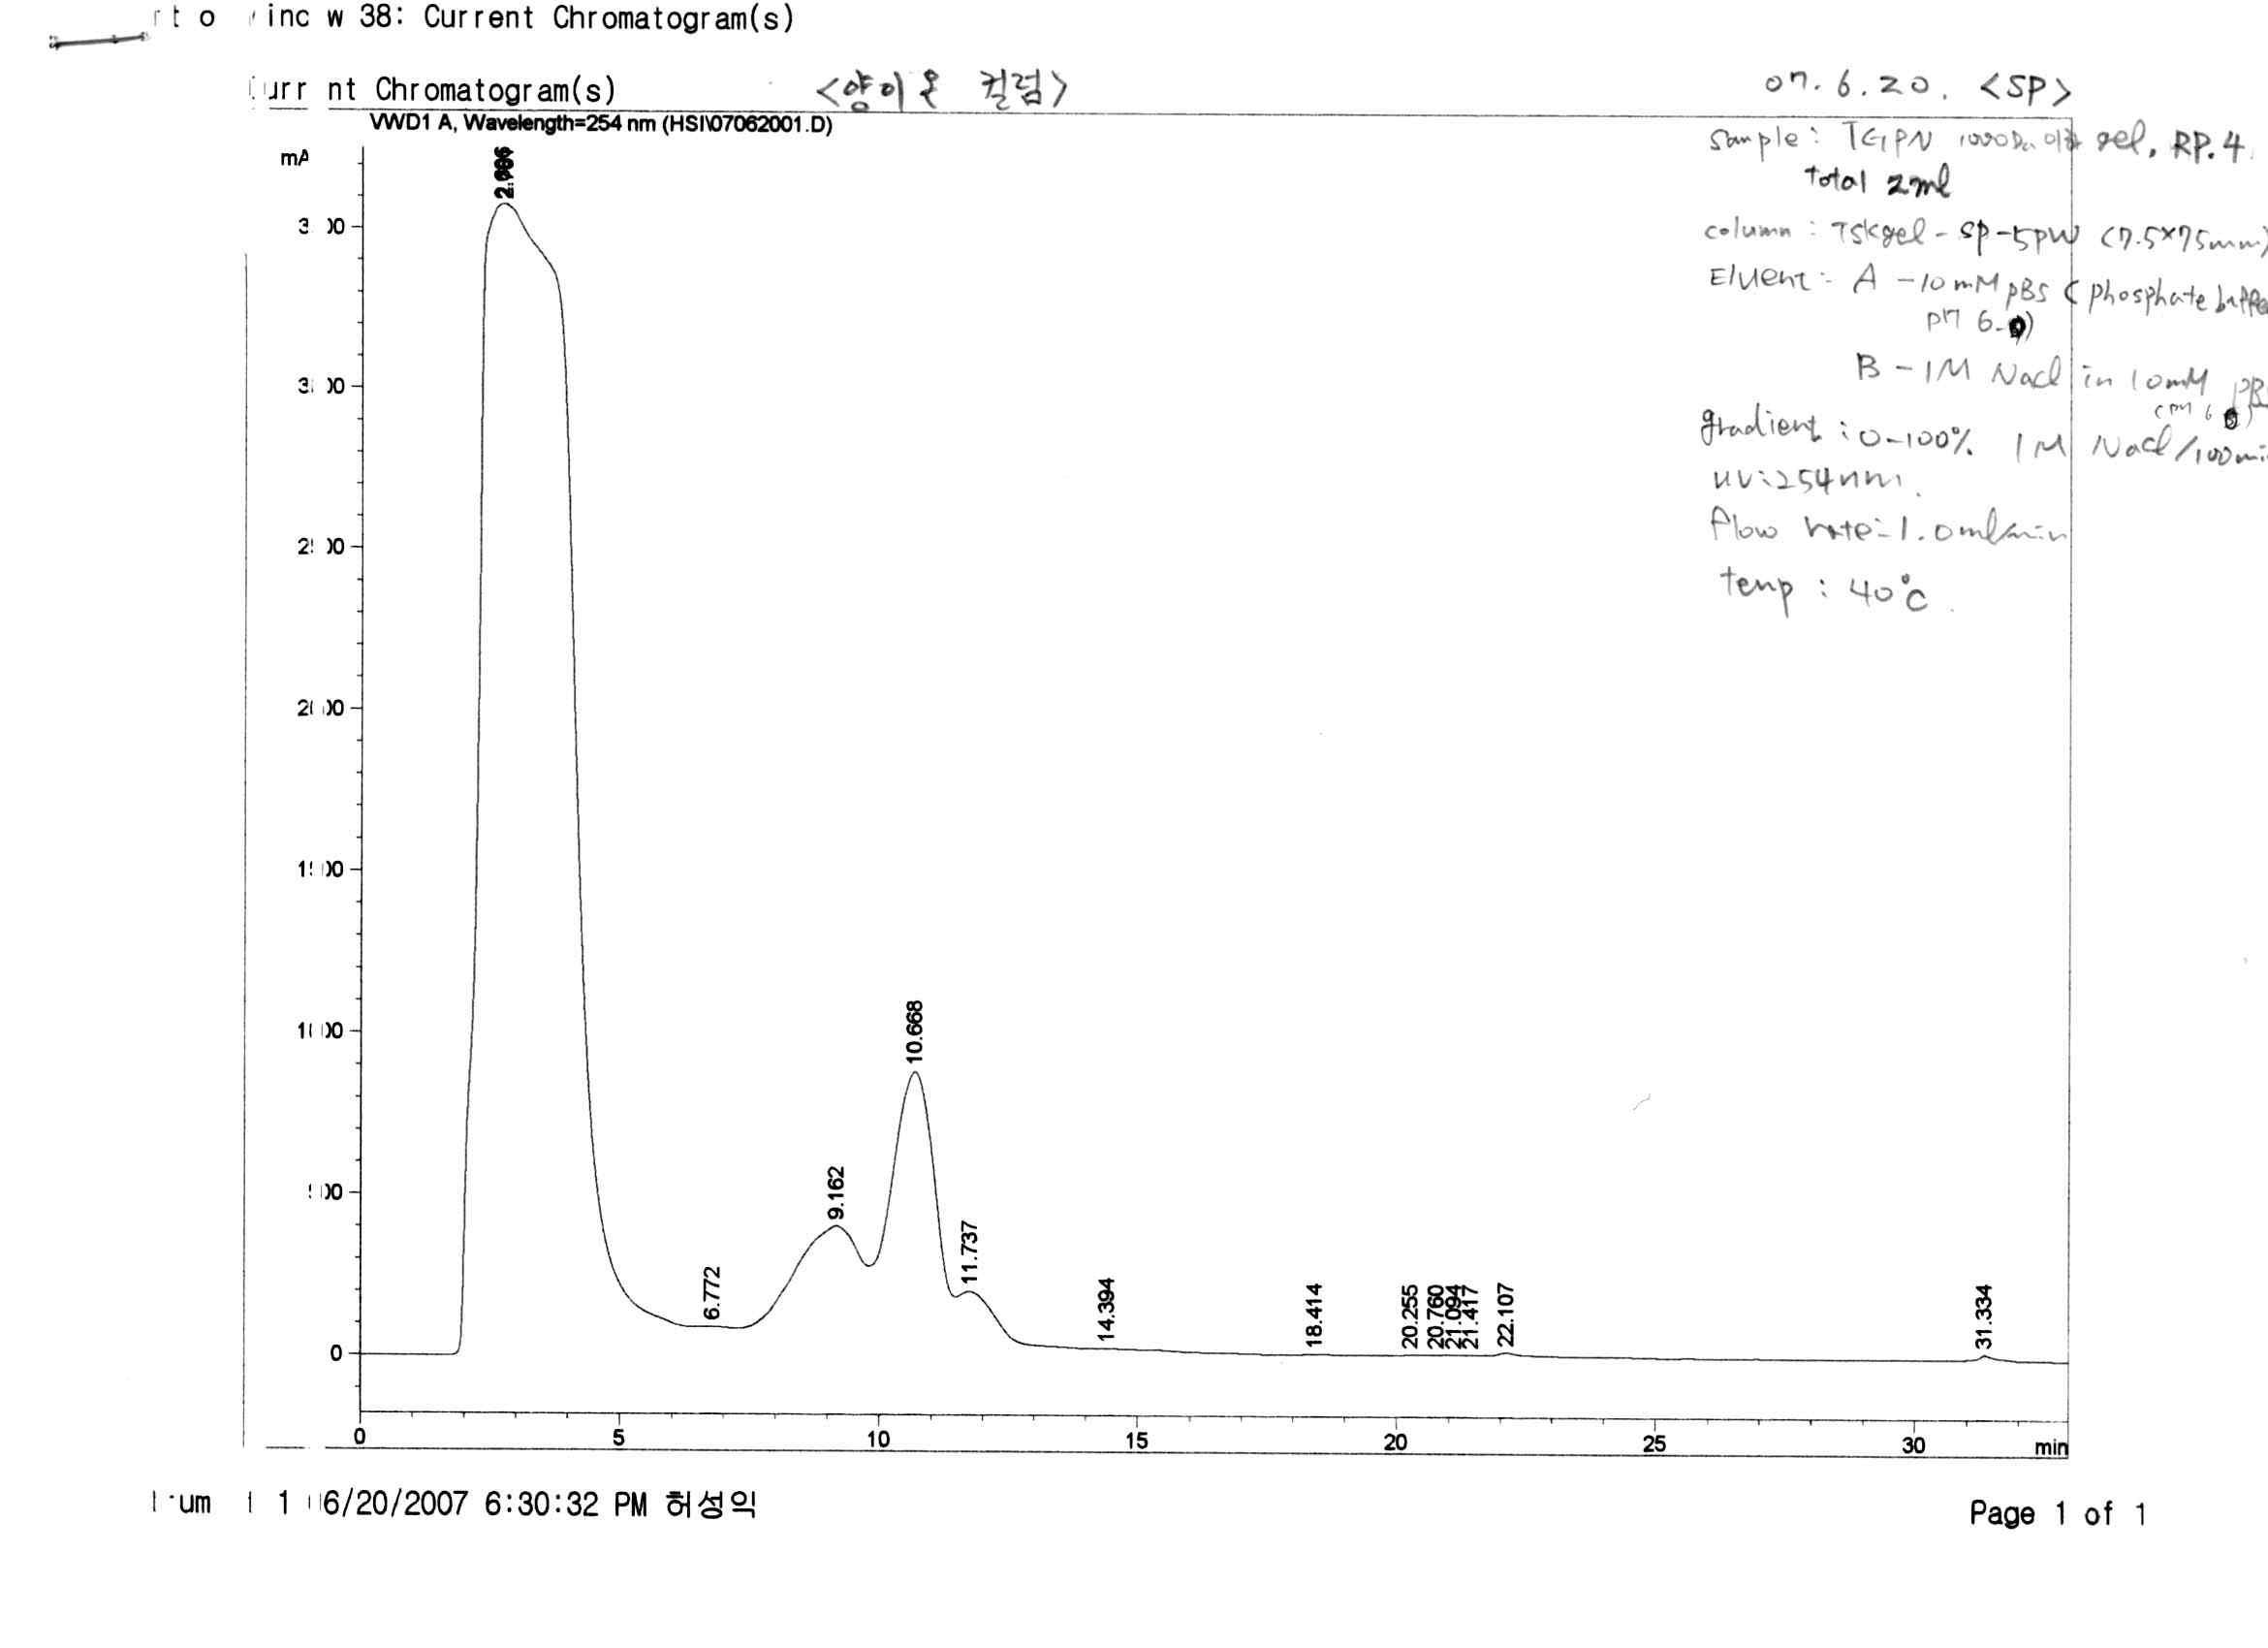 Cation-exchange HPLC profile of the active fraction 9 in 그림 16. The activity fraction were loaded onto TSK-gel SP-5PW(7.5 x 75 mm) column and eluted with a linear gradient of 1.0 M NaCl(dotted line) in 10 mM phosphate buffer(pH 6.0) at a flow of 1.0 mL/min. The black bar represent fraction of ACE inhibition activity